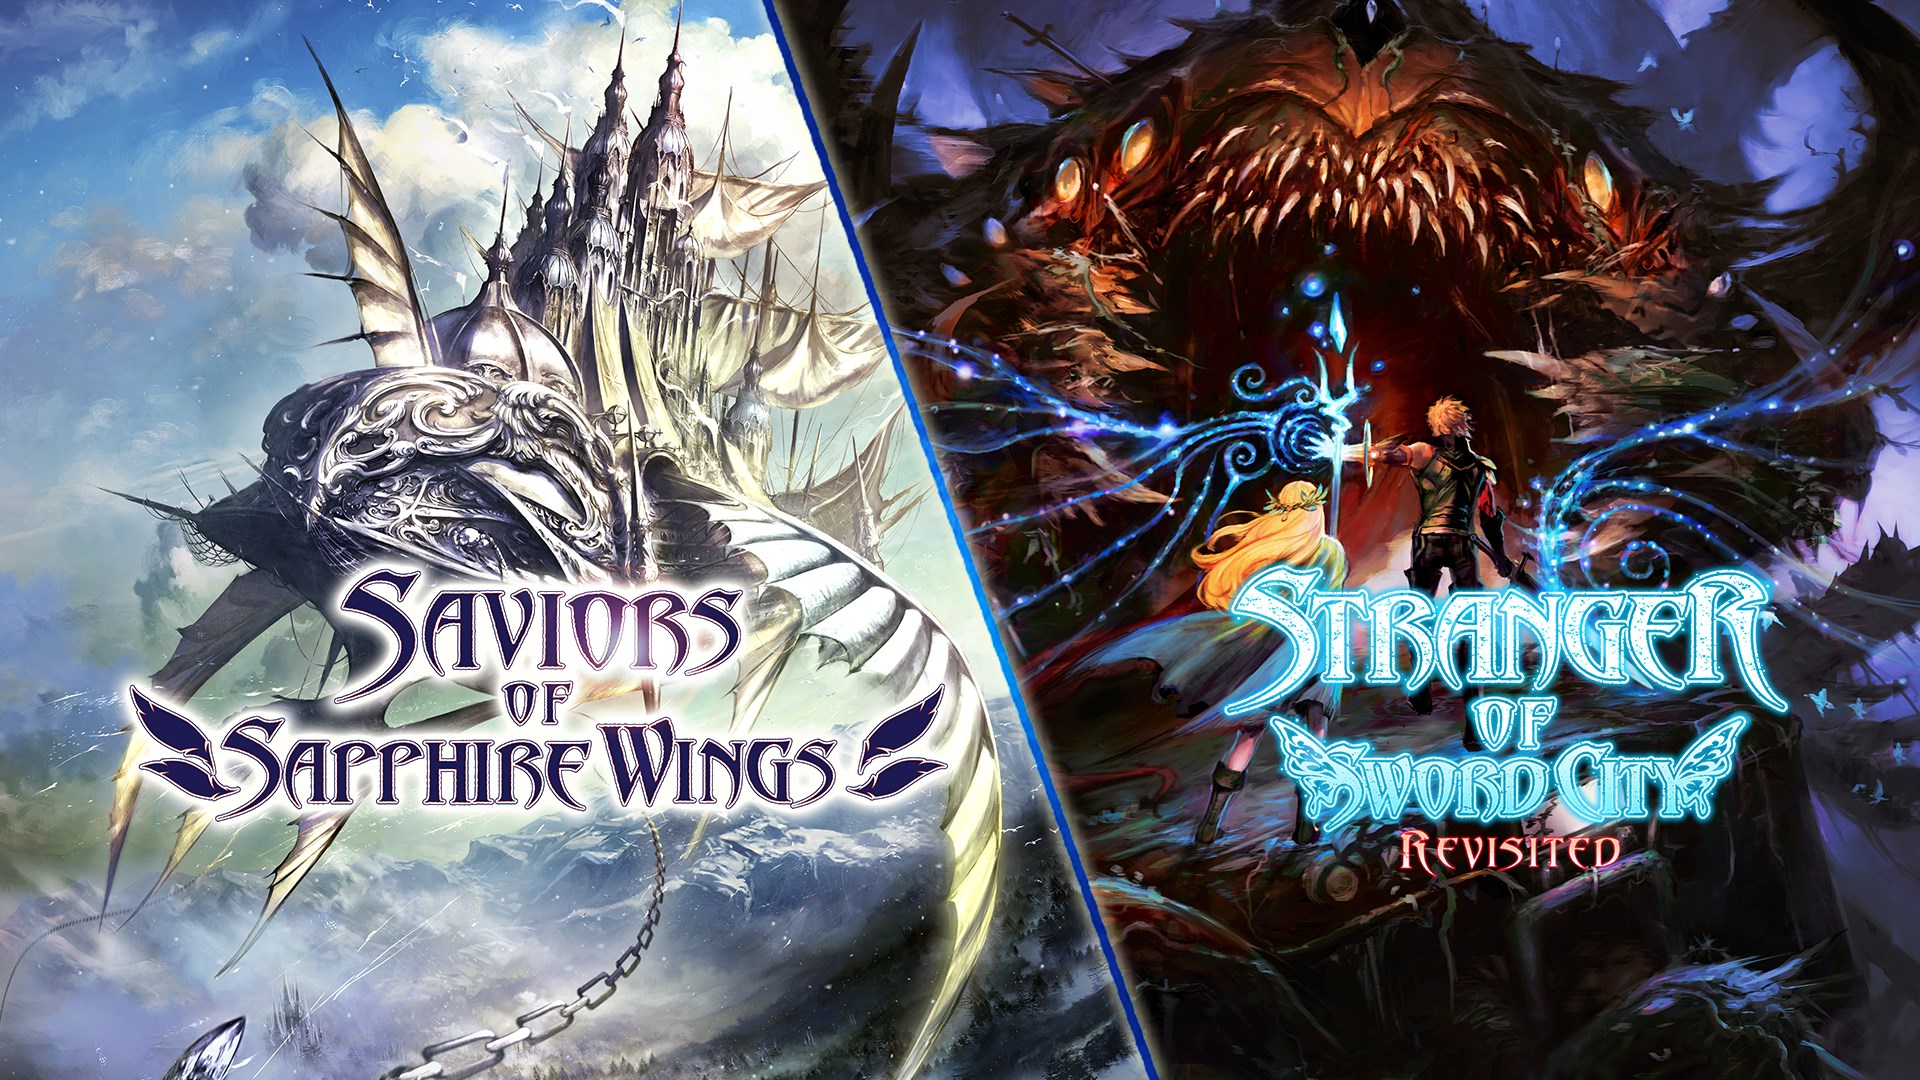 Buy Saviors Of Sapphire Wings Stranger Of Sword City Revisited Microsoft Store